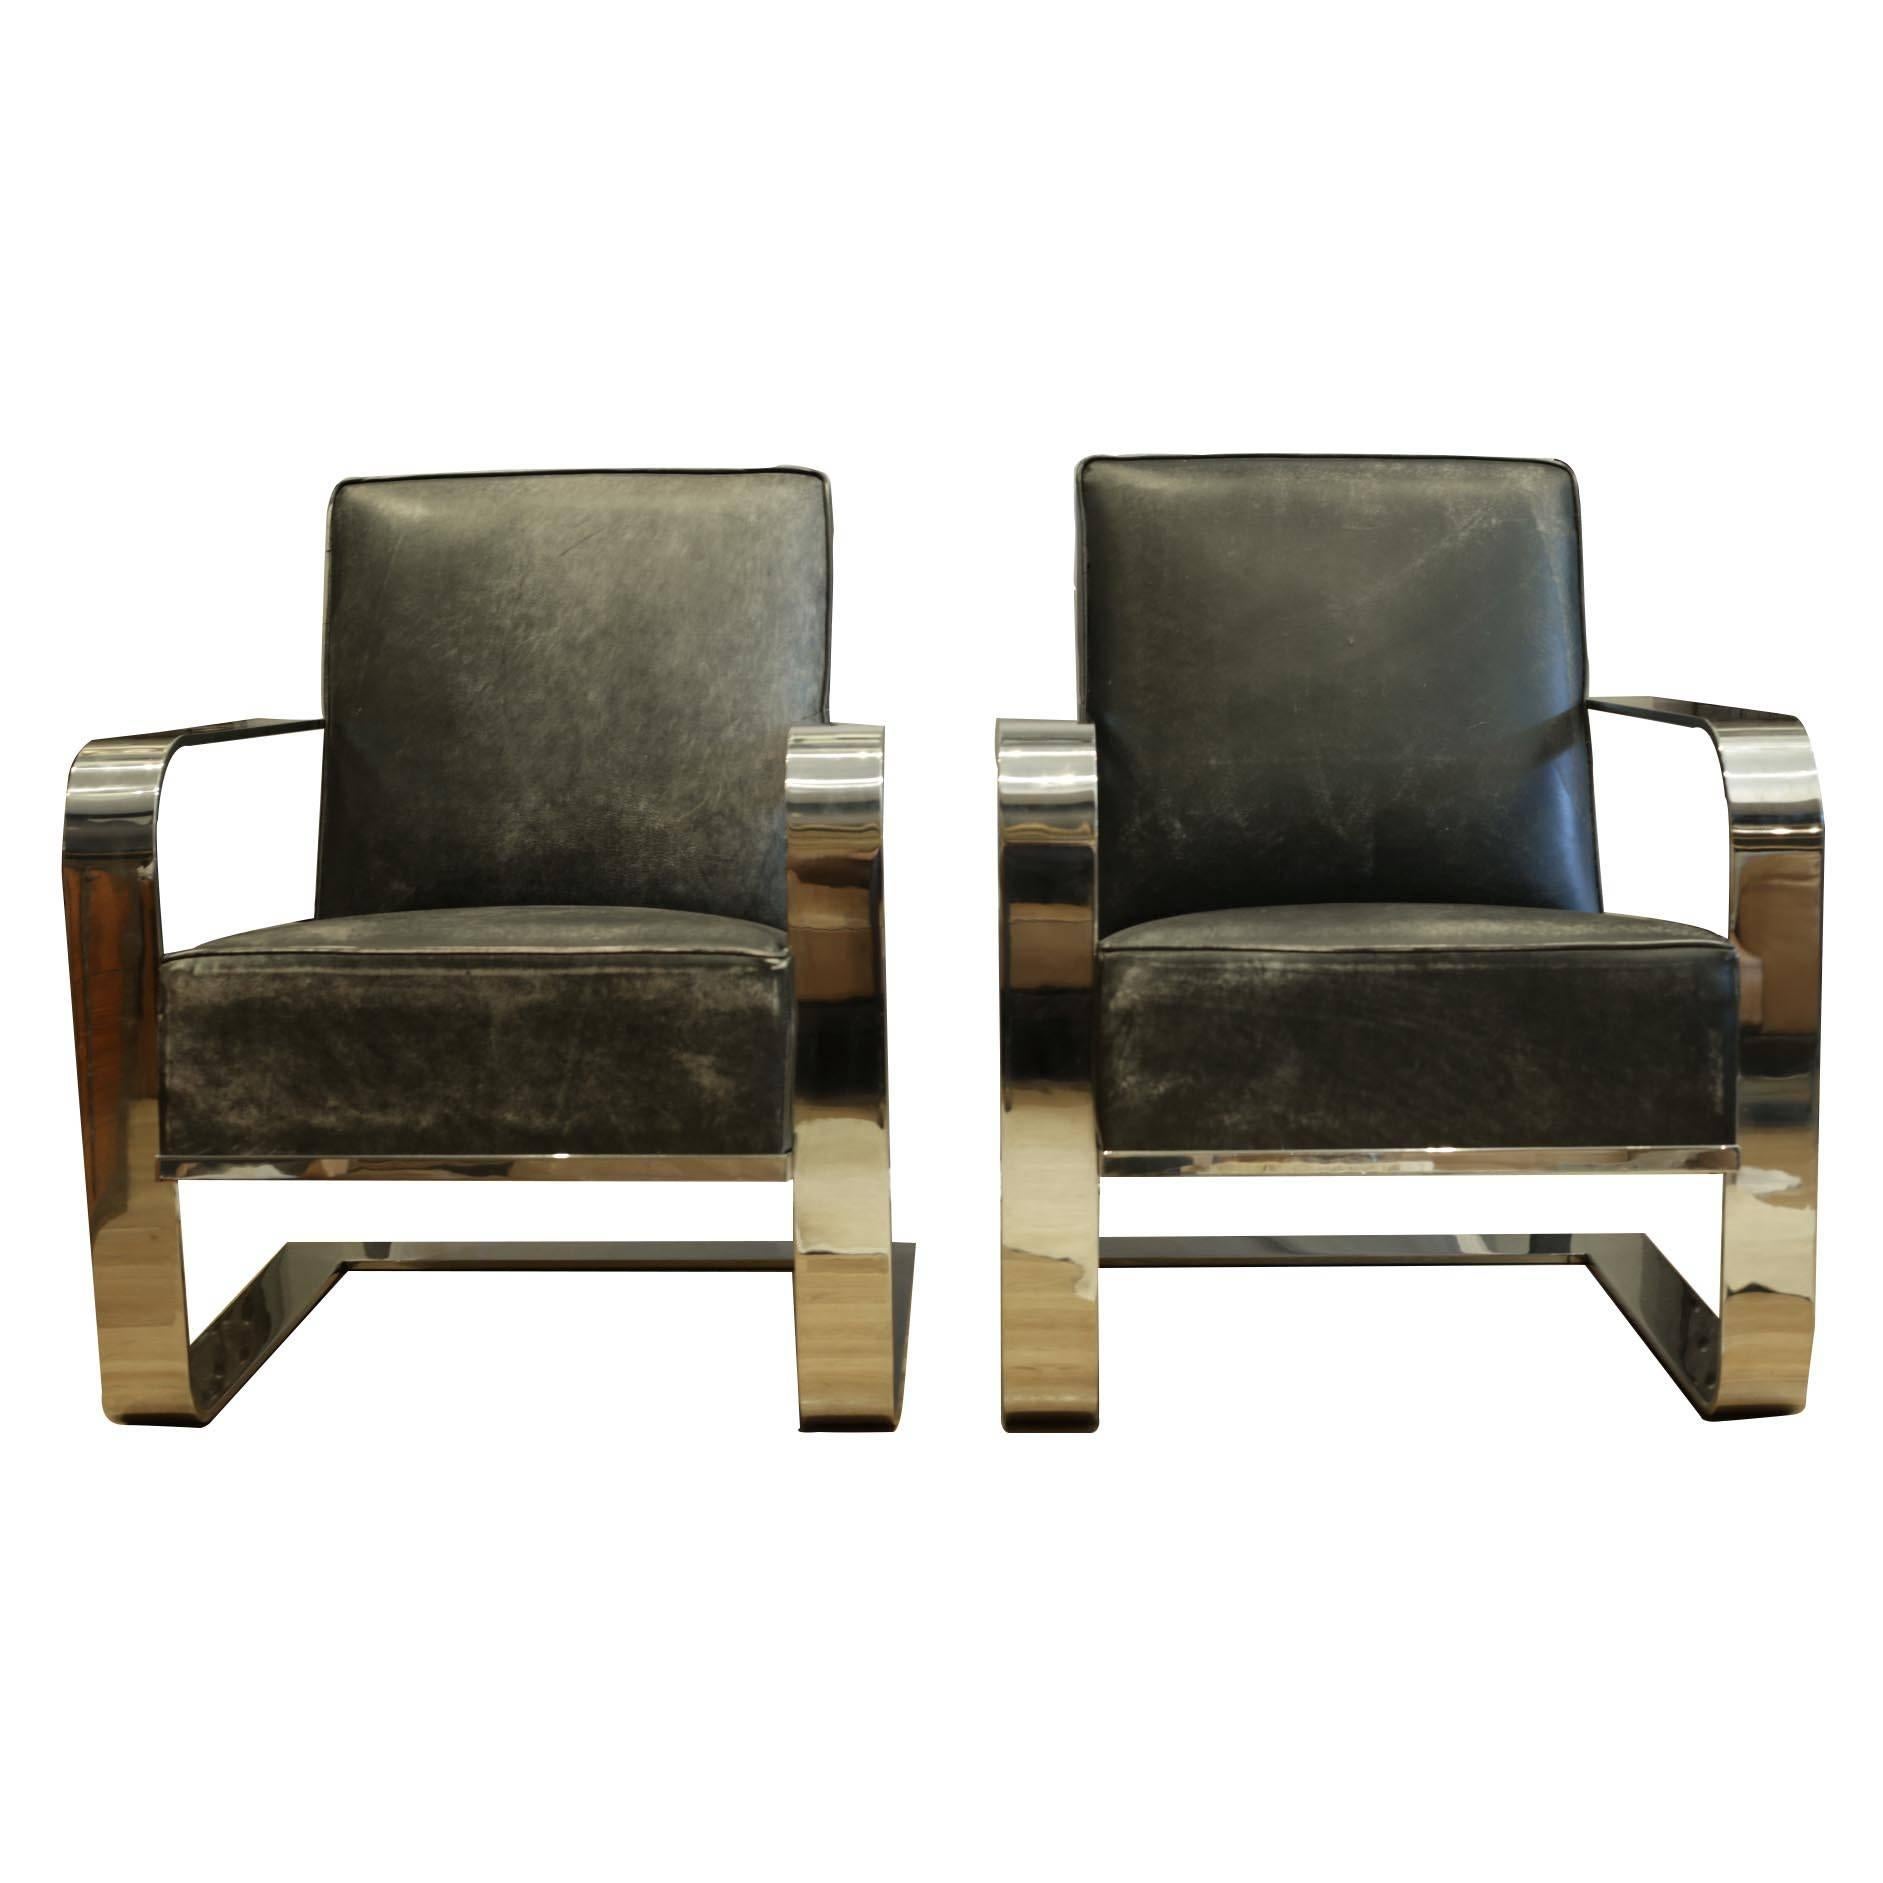 Price is per chair. May sell individually.

Pair of Ralph Lauren lounge chairs with heavy chrome detailing in the arms, legs and the back. Beautiful high grade distressed black leather. 
Very comfortable with a slight bounce like a rocking chair.